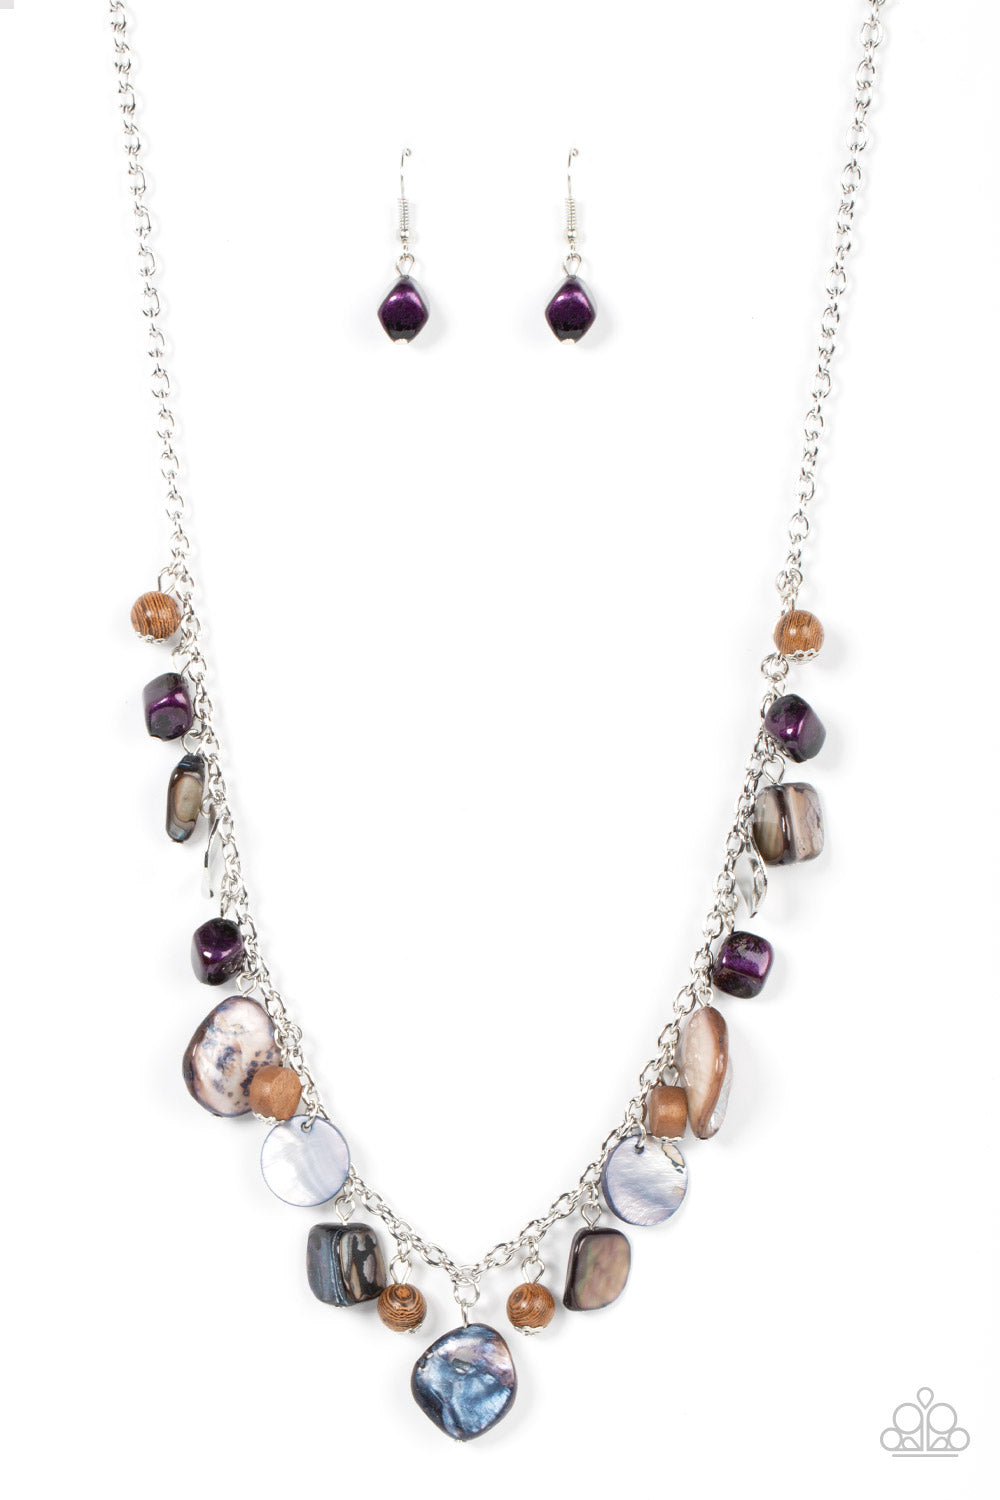 Paparazzi Accessories - Caribbean Charisma - Purple Necklaces a mismatched collection of warped silver discs, brown wooden beads, and iridescent shell-like rock accents dances from the bottom of a classic silver chain, creating a tropical sensation across the chest. Features an adjustable clasp closure.  Featured inside The Preview at GLOW!  Sold as one individual necklace. Includes one pair of matching earrings.